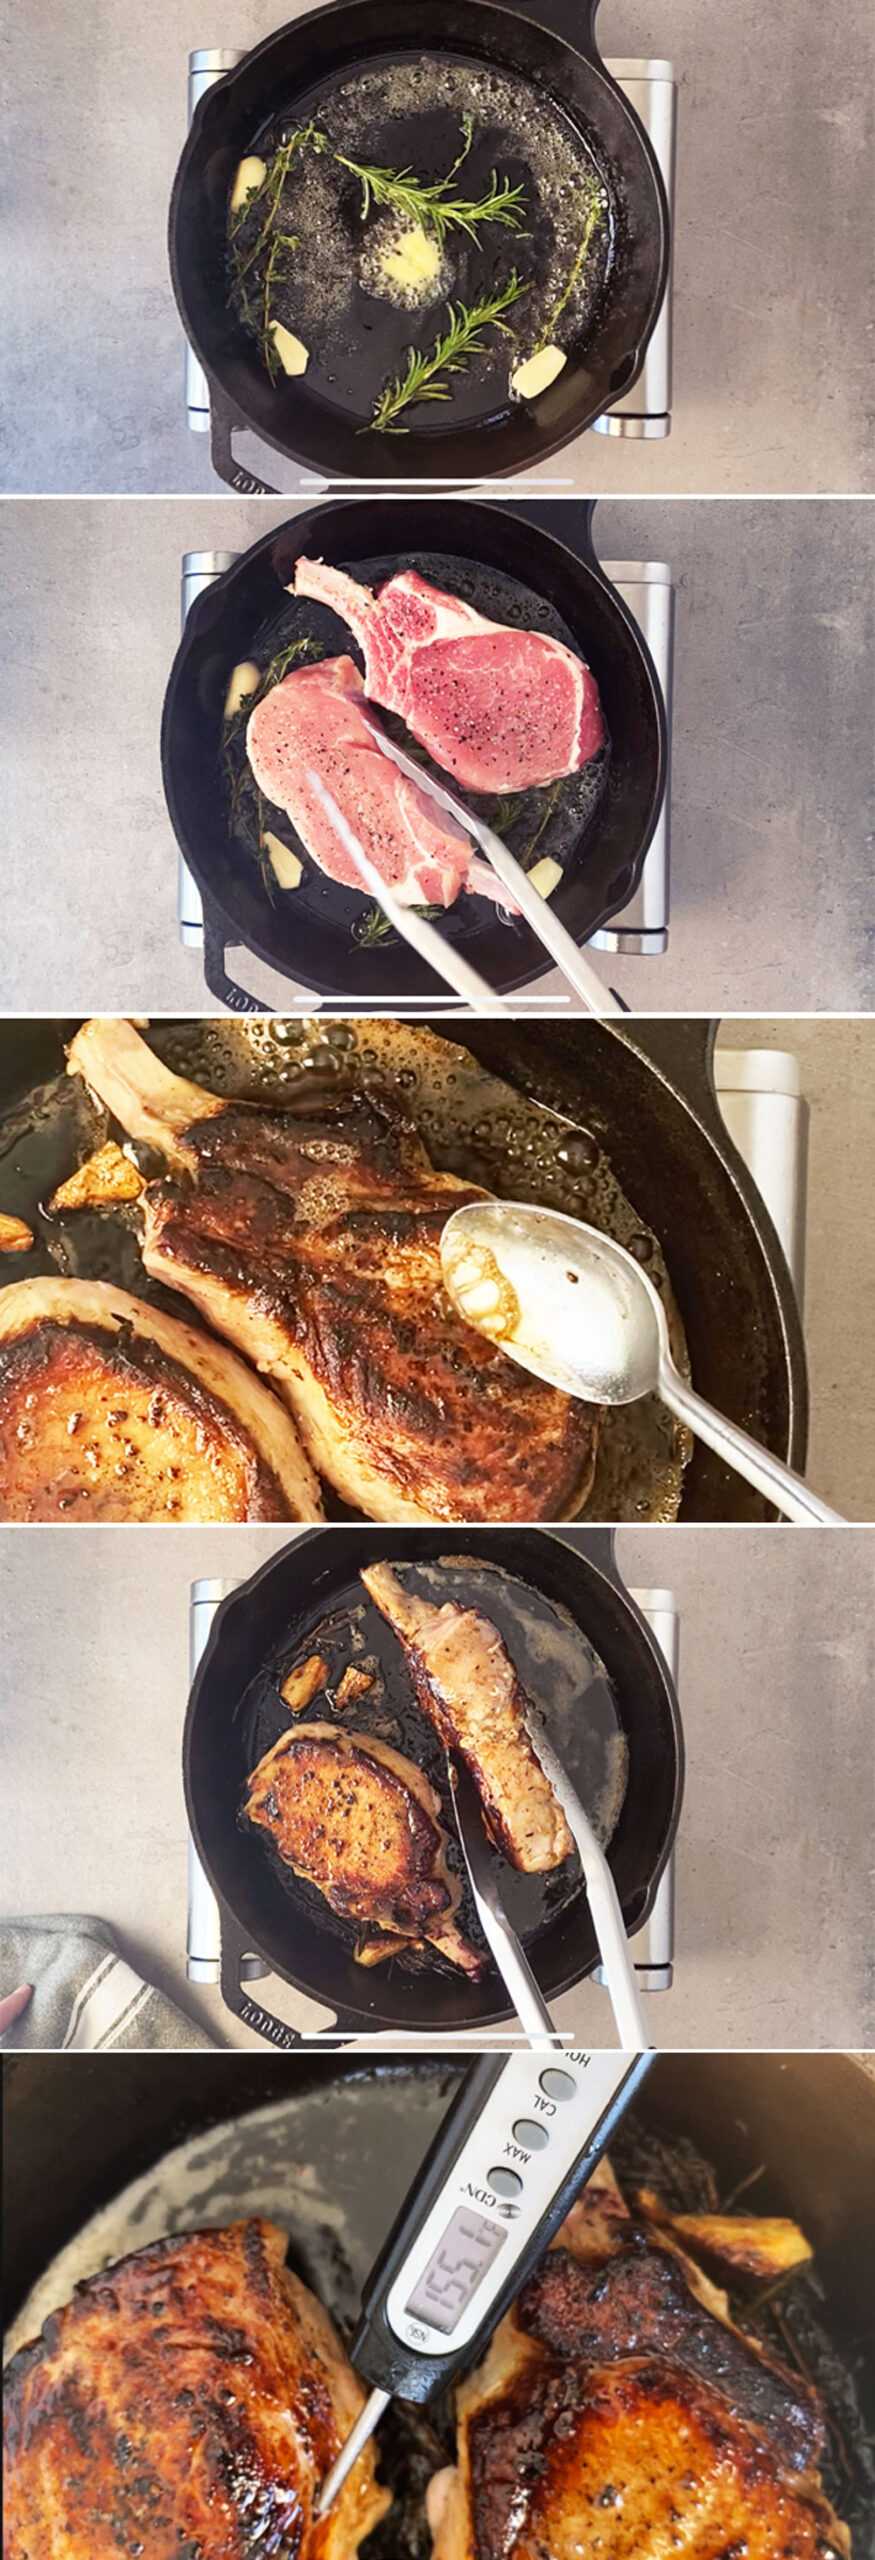 How to make pork chops in a cast iron skillet 0 step by step images. 